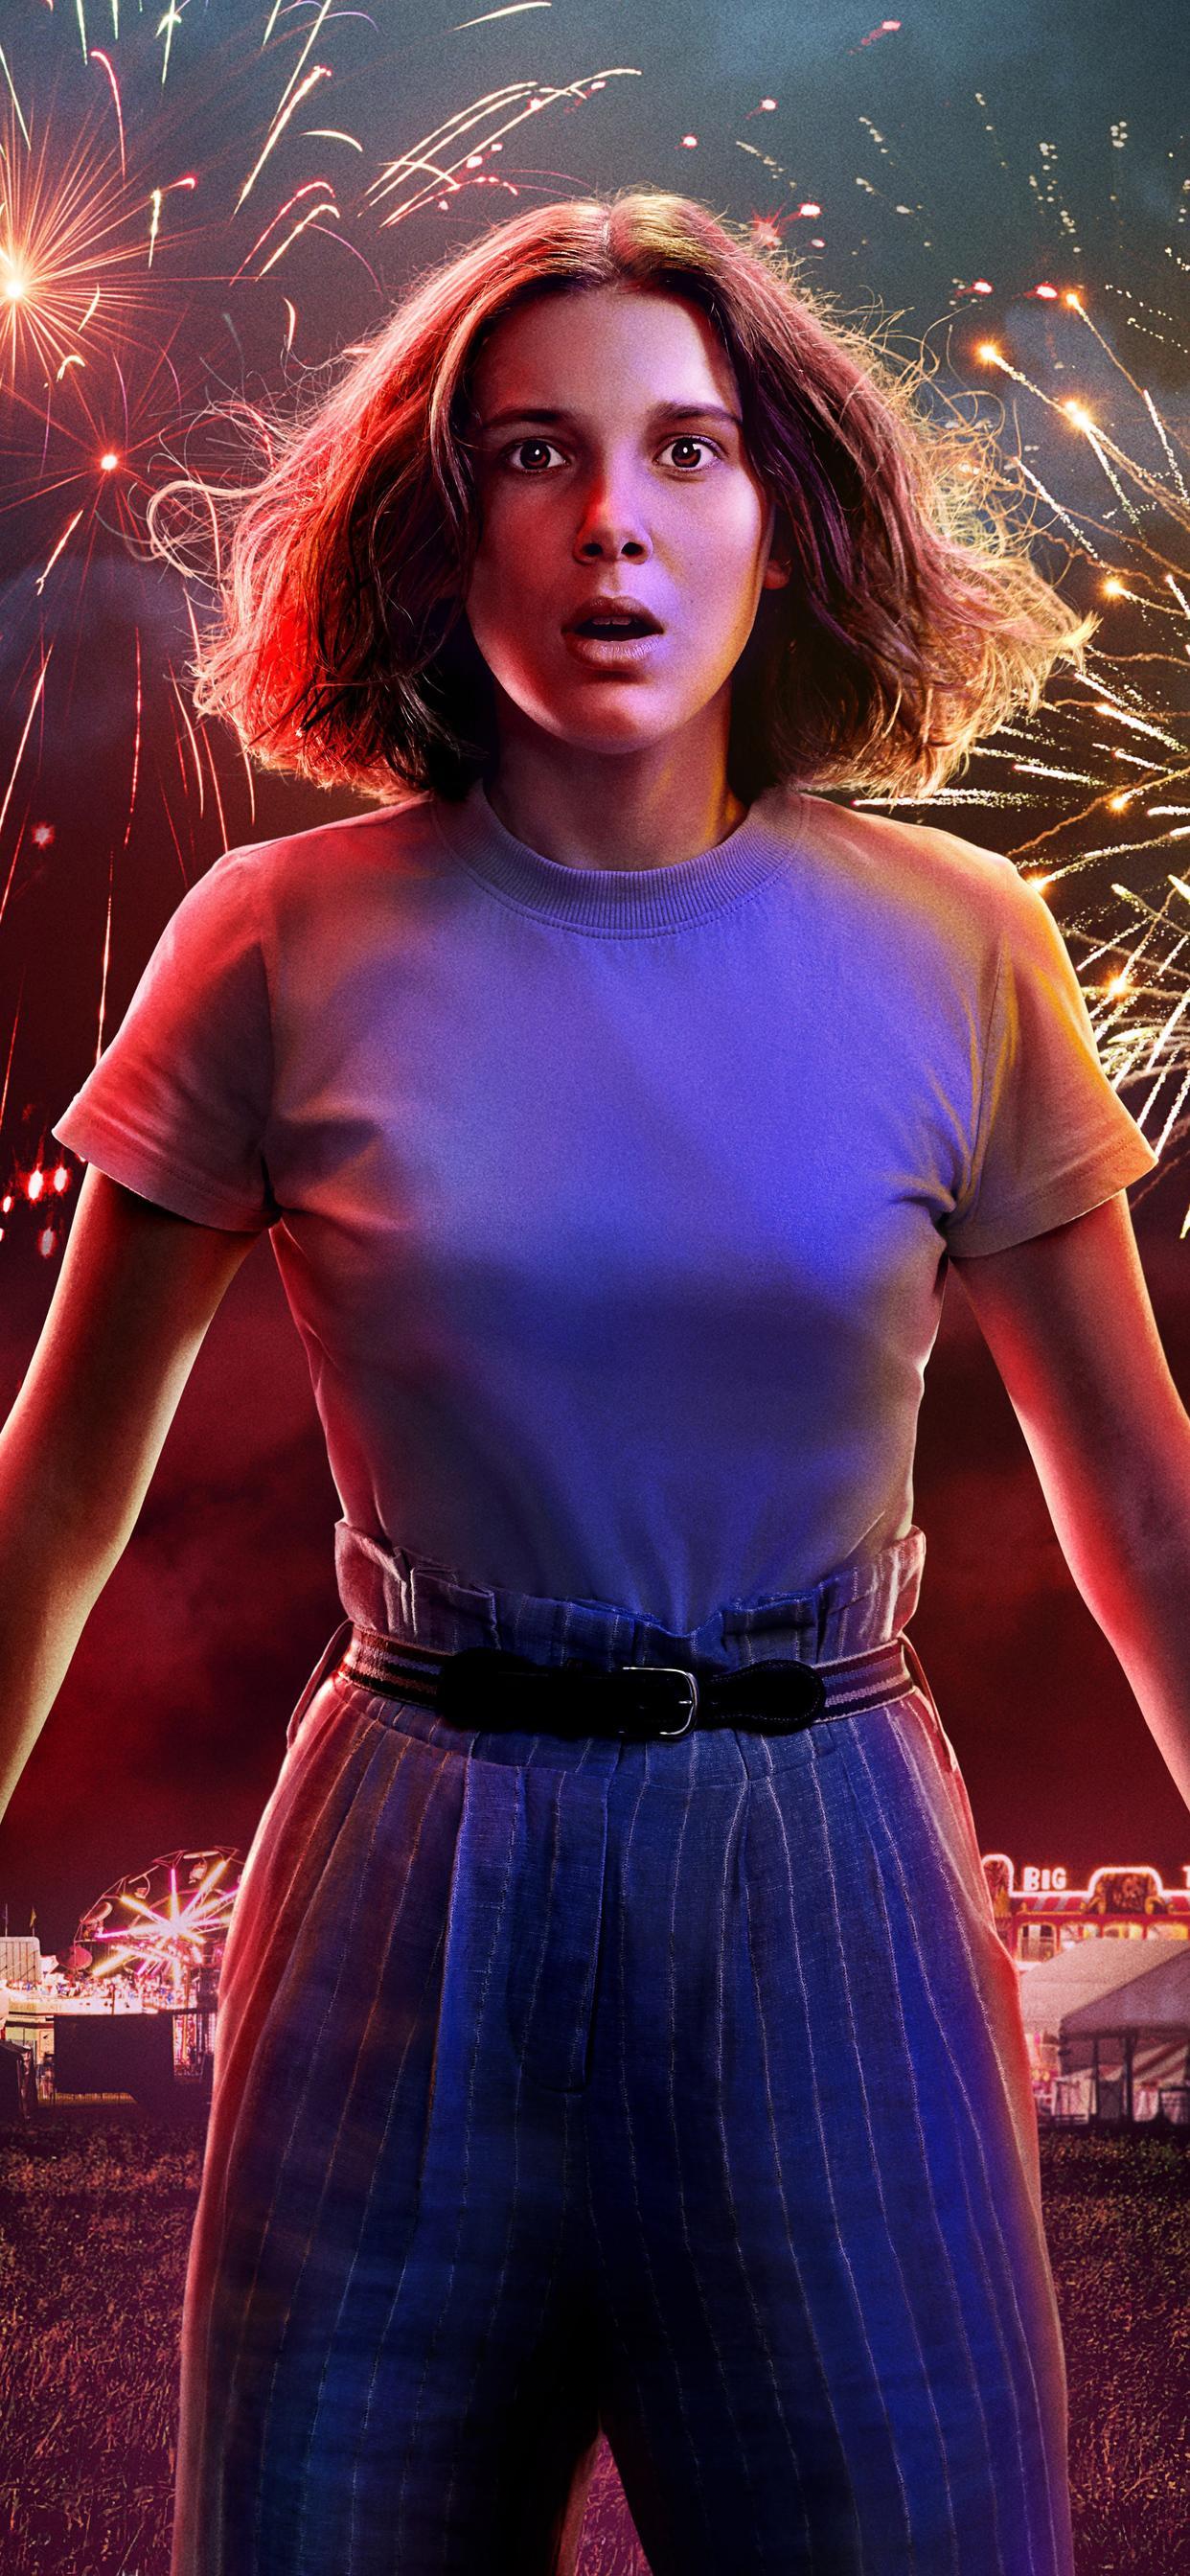 Eleven In Stranger Things Season 3 2019 5k iPhone XS MAX